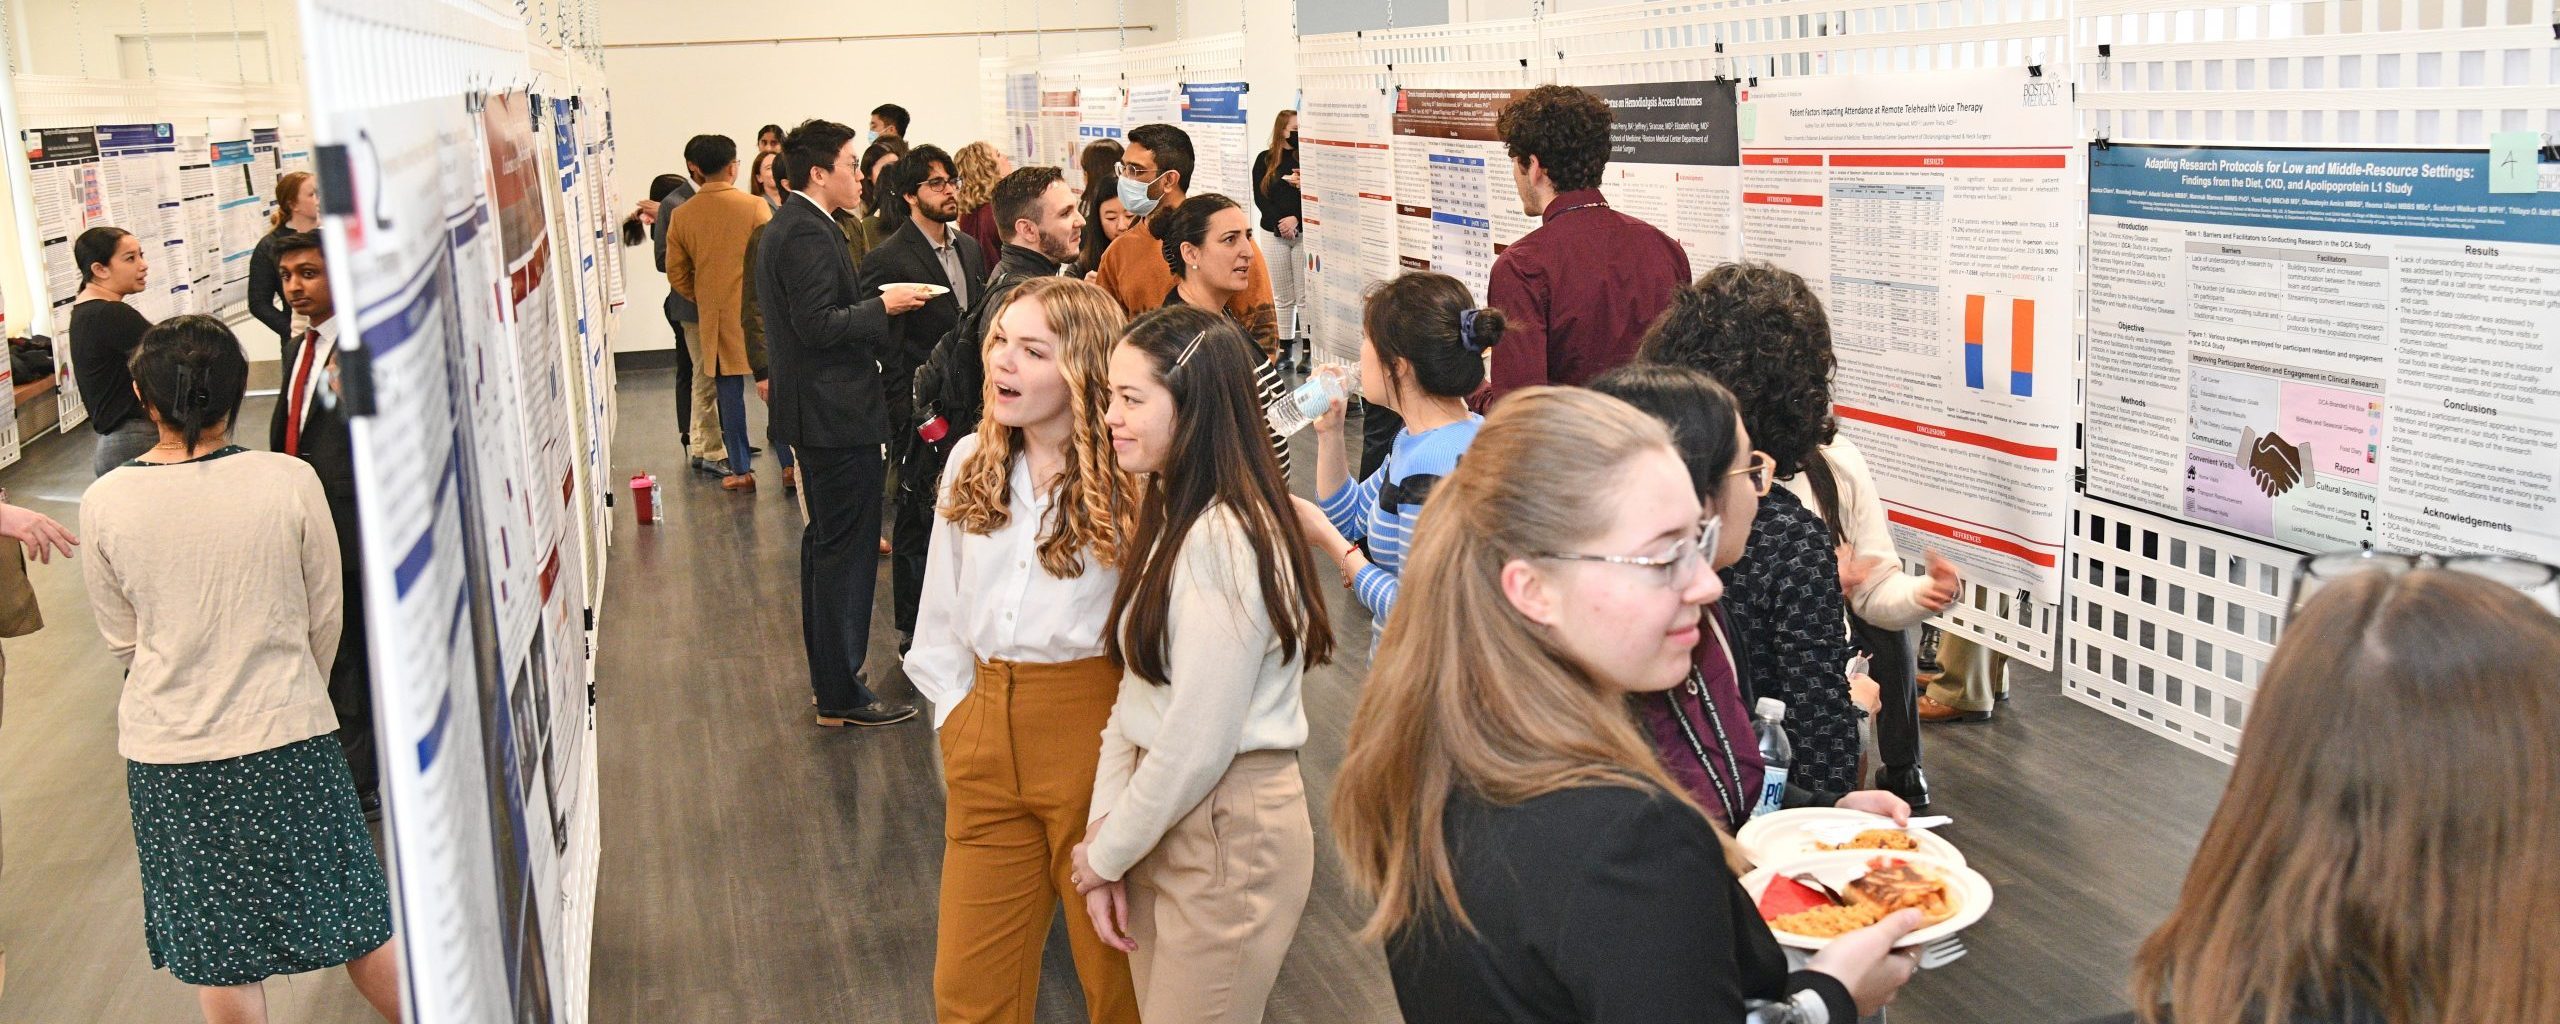 Medical students, faculty and guests viewing research posters